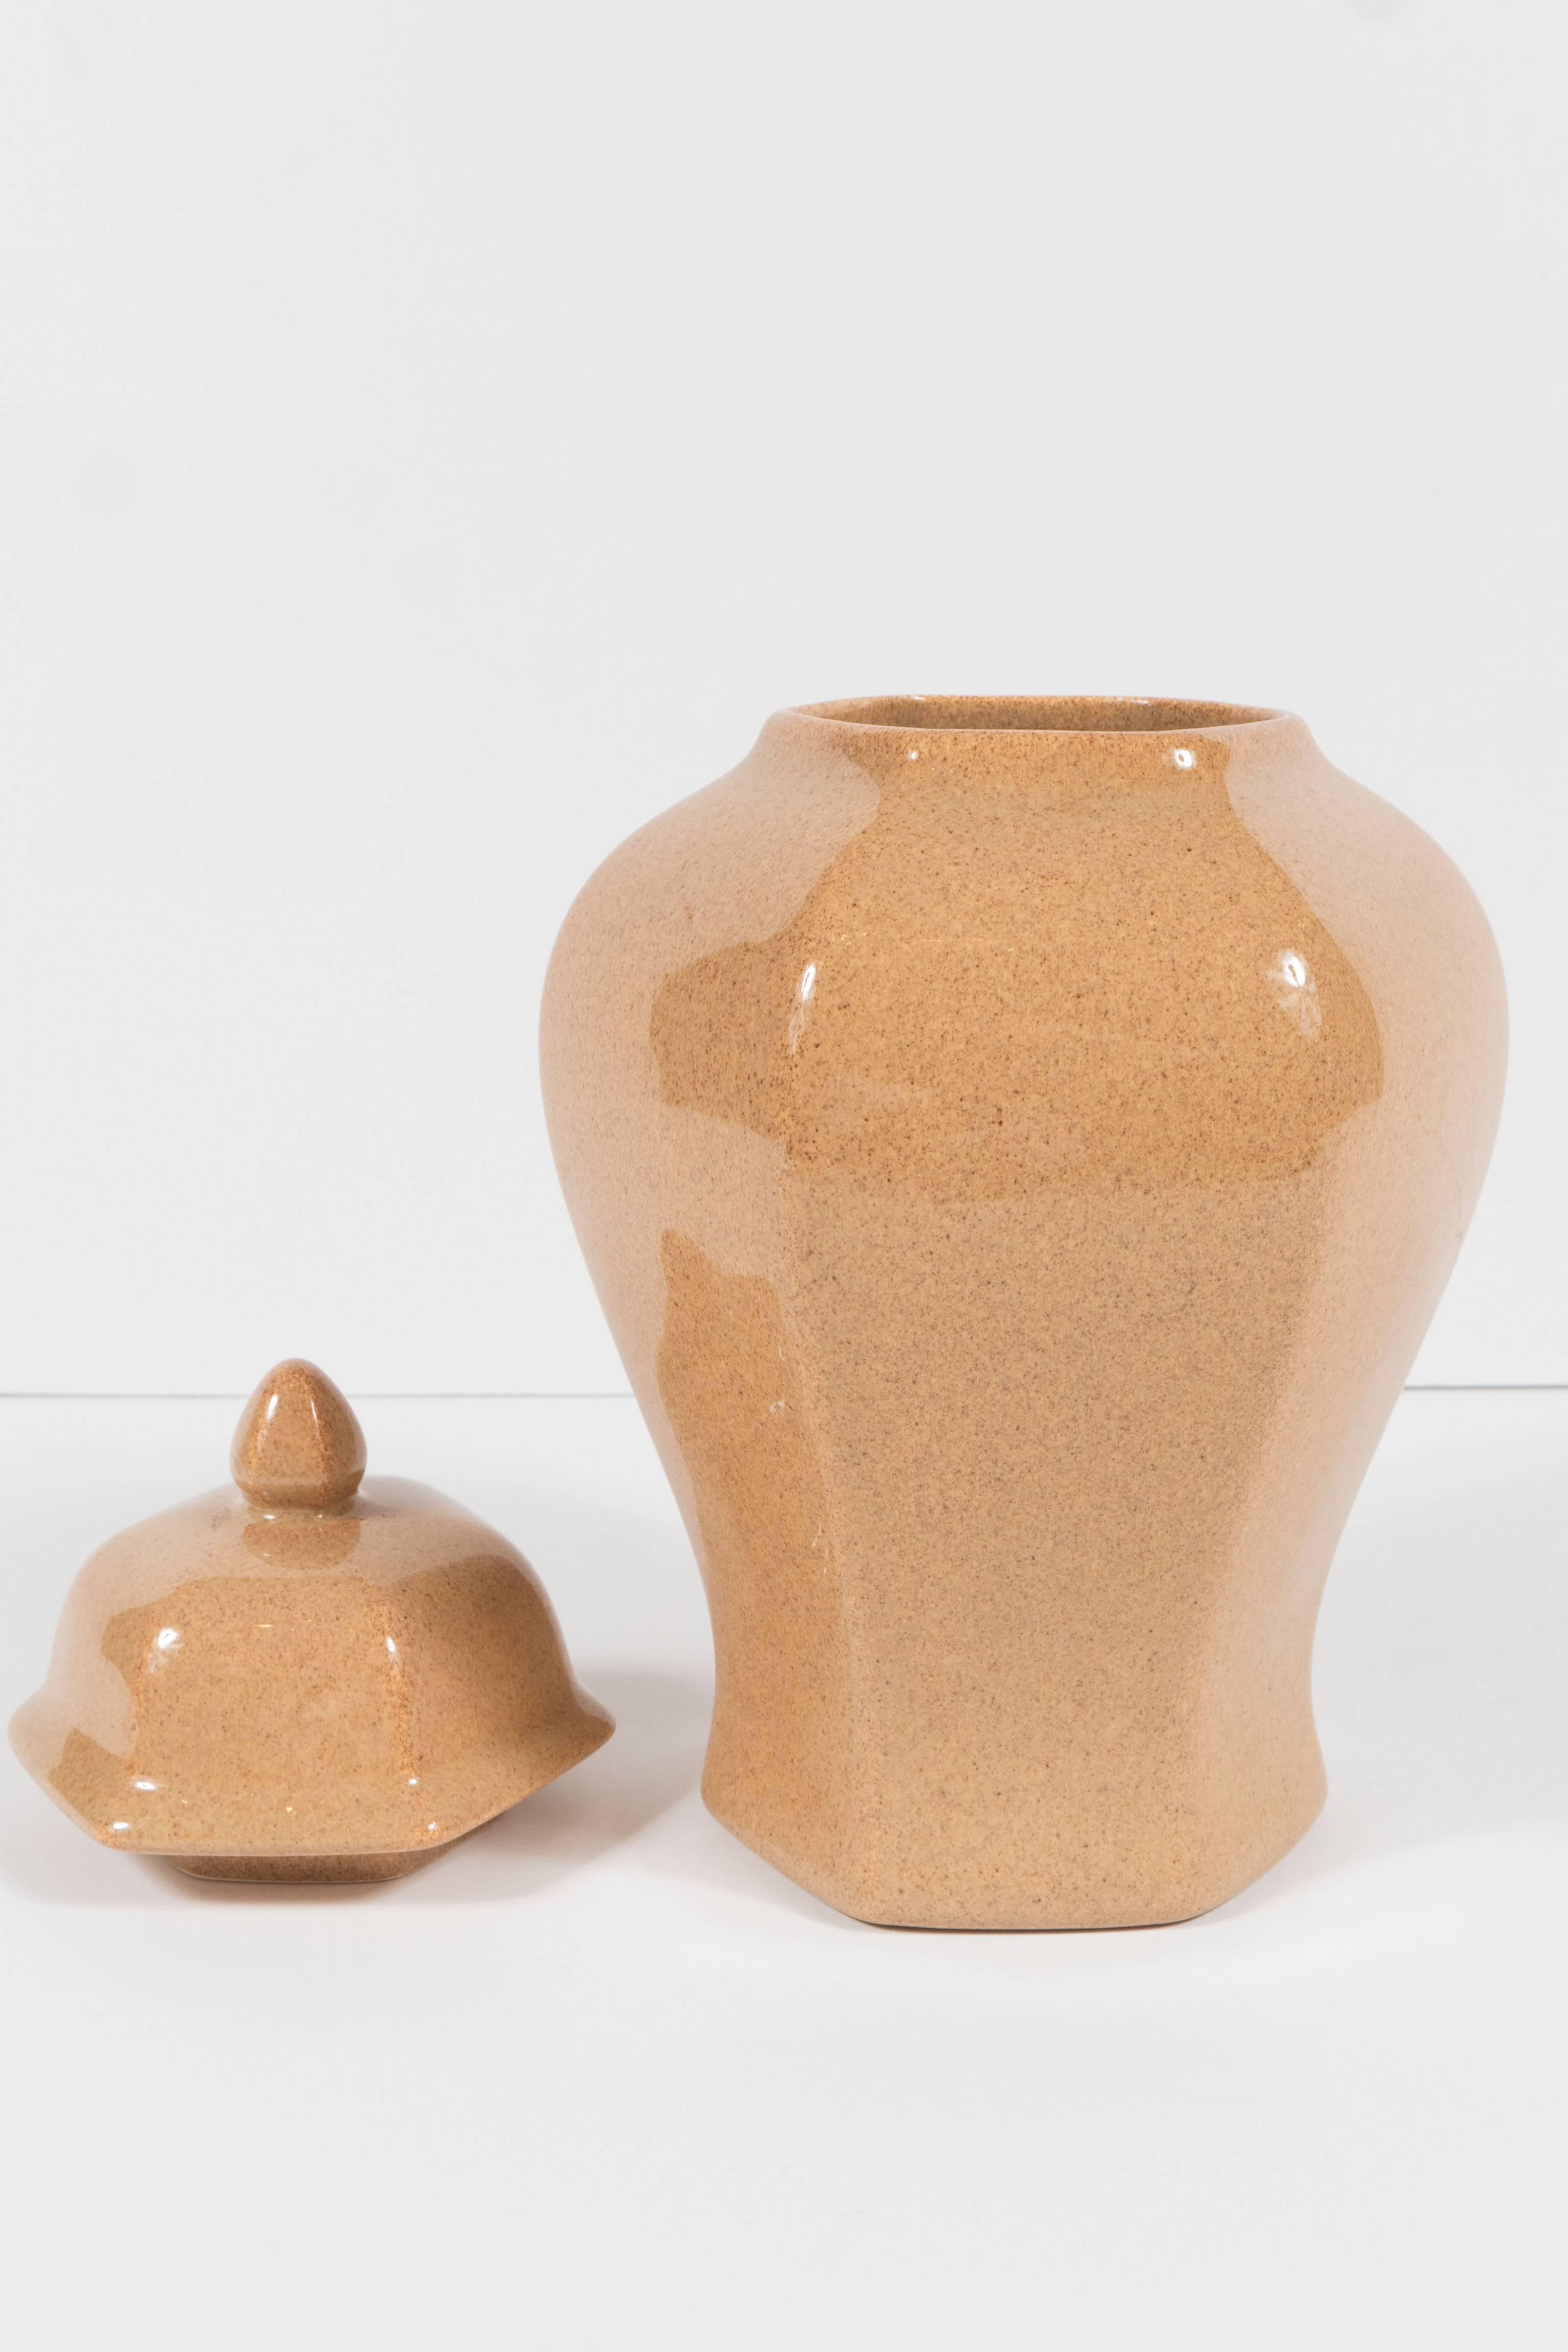 This rounded hexagonal form stylized ginger jar has a beautiful sand colored glaze and is signed Tiffany on the bottom . It is a great accessory piece that would style in well with any decor. It is in mint condition.